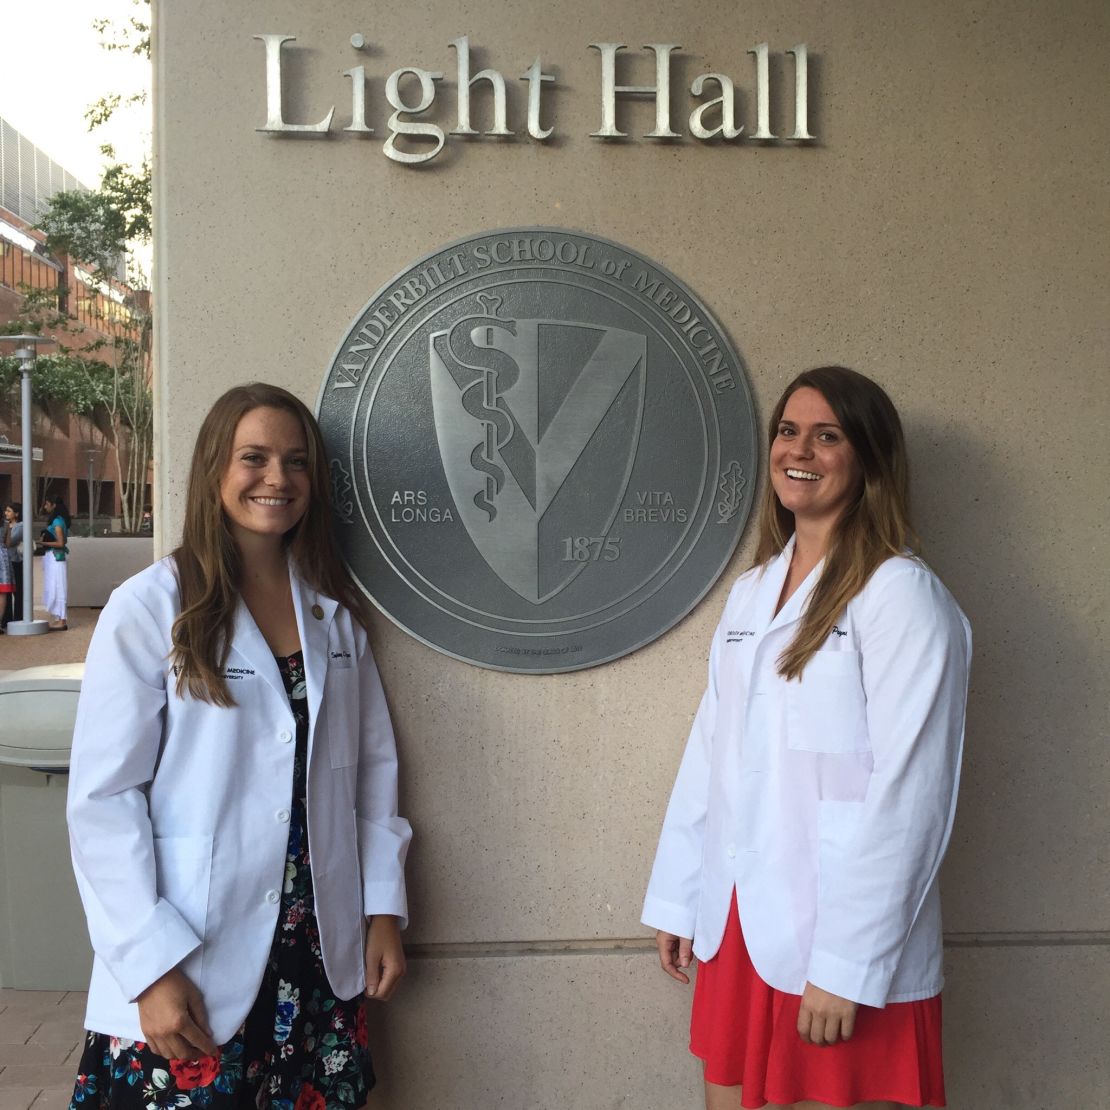 Shelby Payne, right, and her twin sister both study at Vanderbilt School of Medicine.  